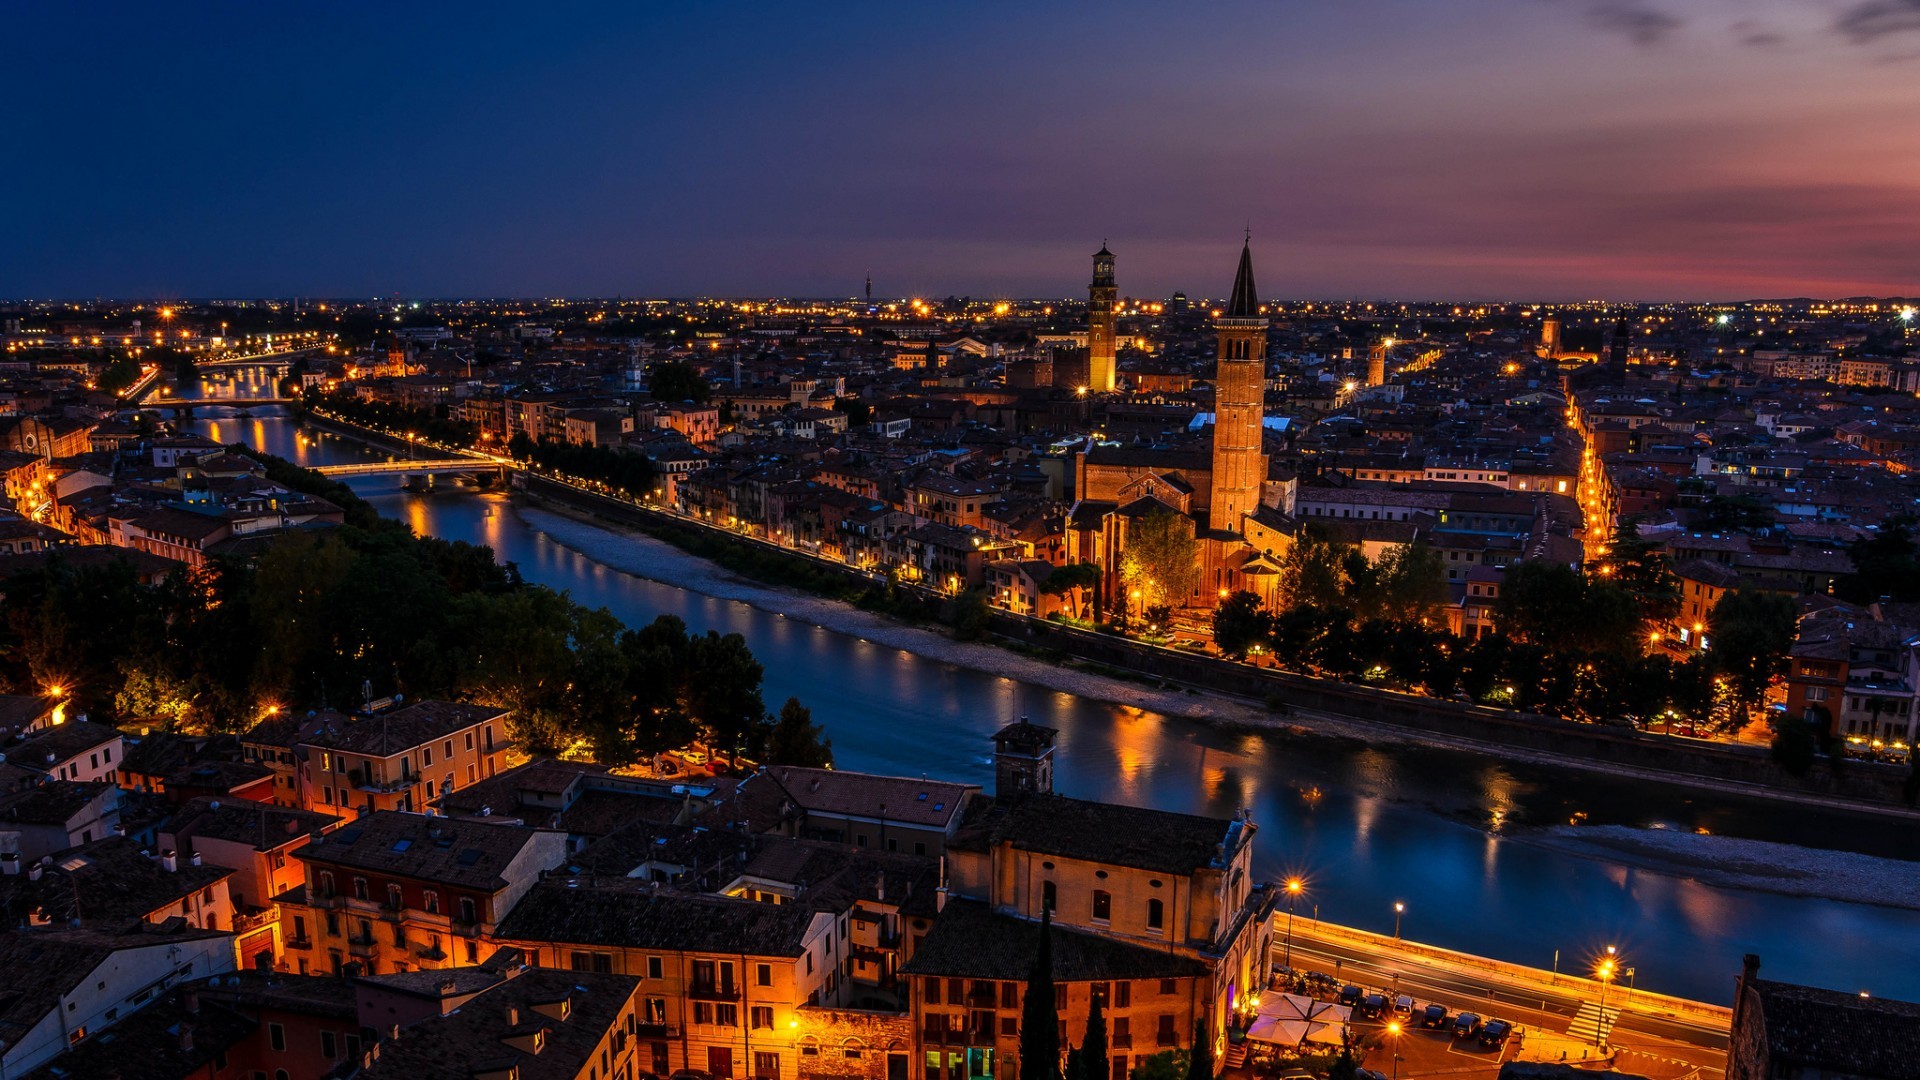 General 1920x1080 architecture city cityscape night lights building Verona Italy river old building bridge ancient church tower clouds reflection trees rooftops street